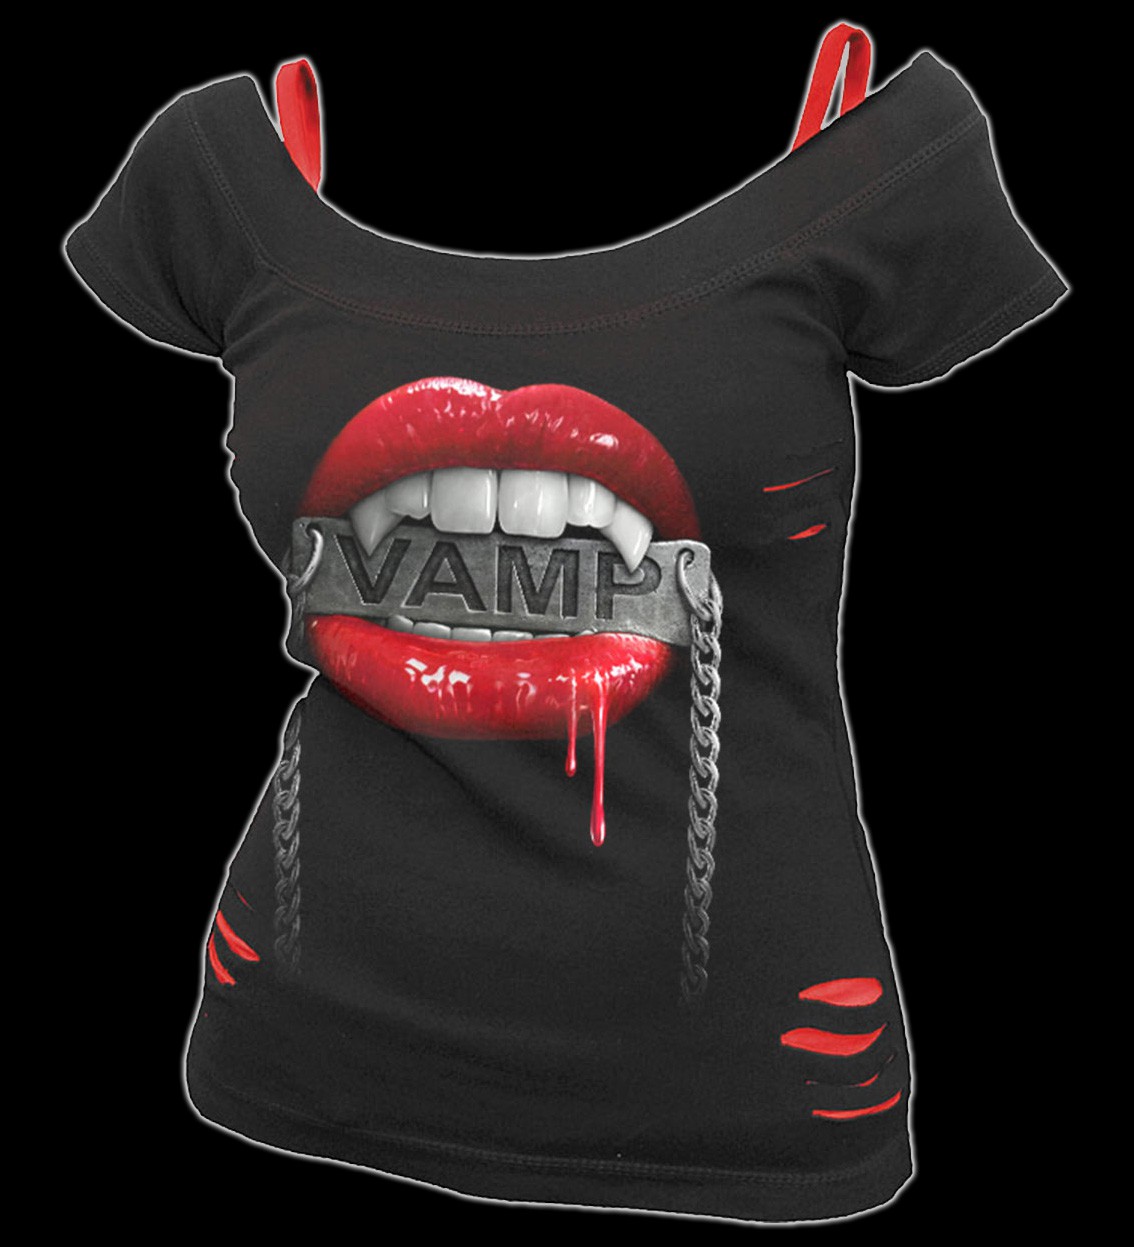 Fangs - Spiral Gothic 2in1 Ripped Shirt with Vampire Teeth